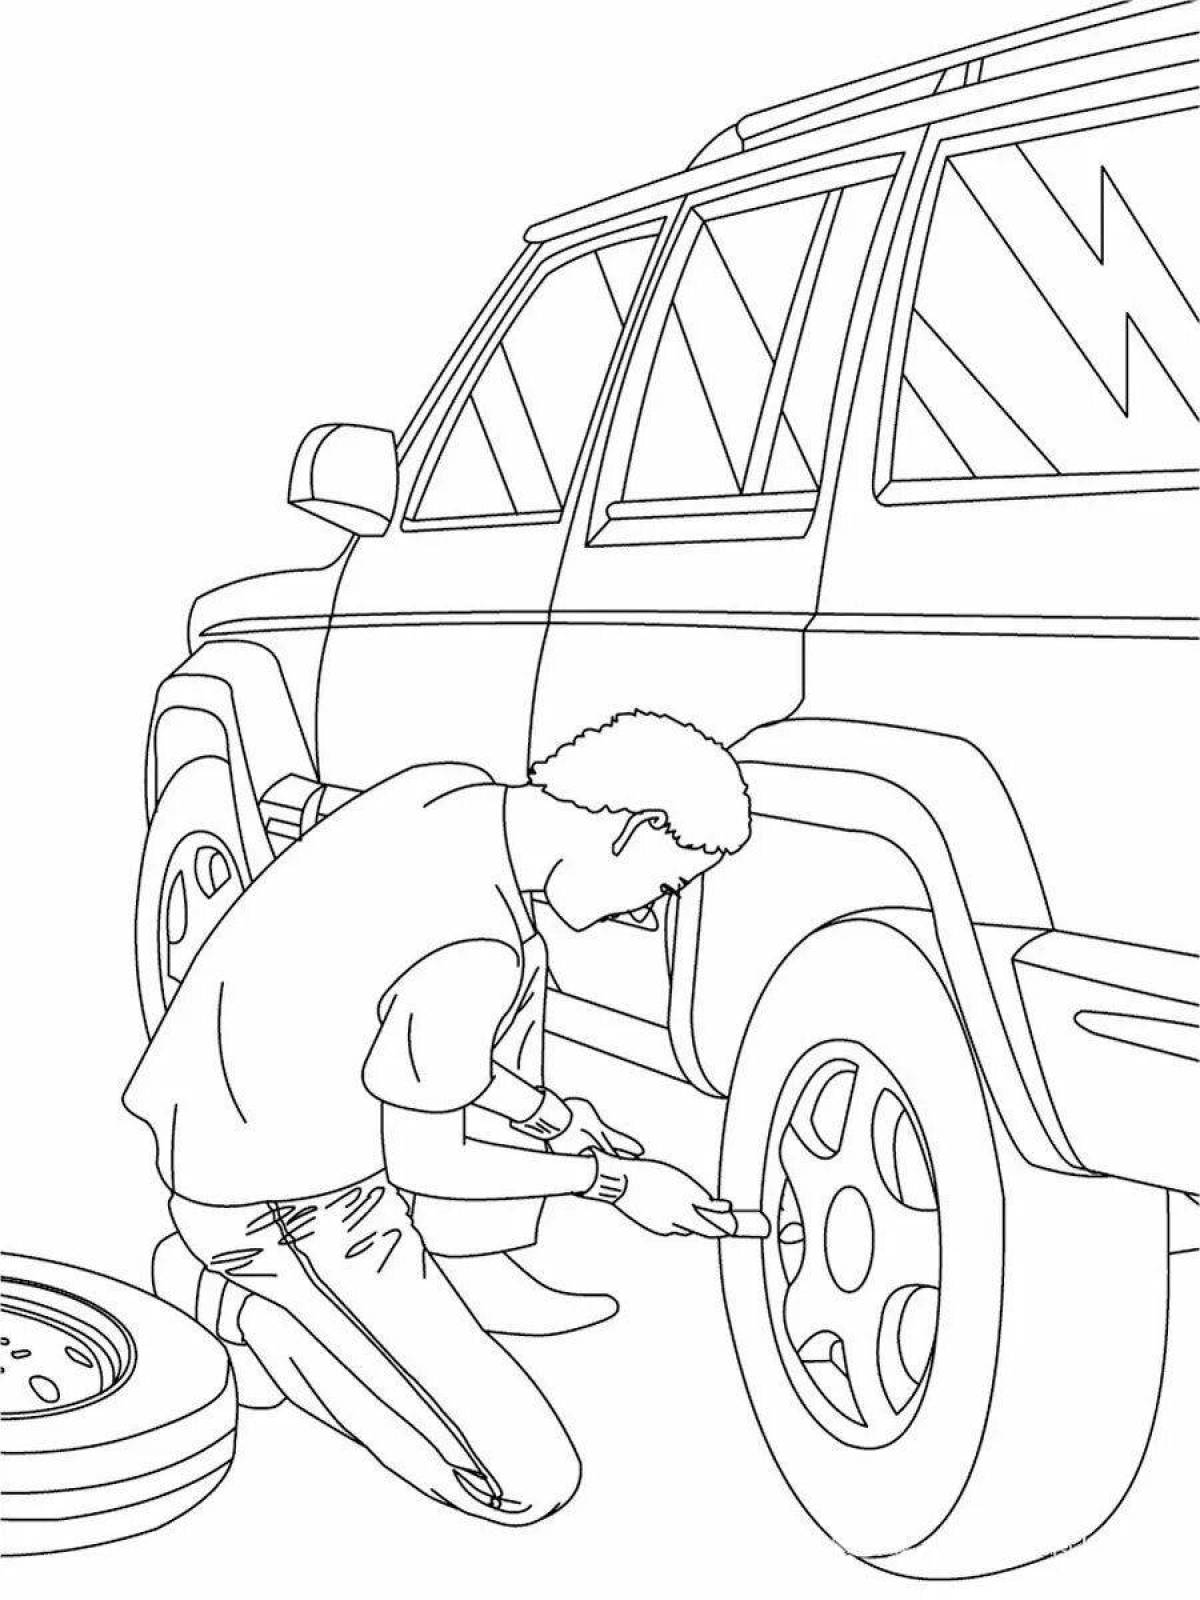 Attractive mechanic coloring page